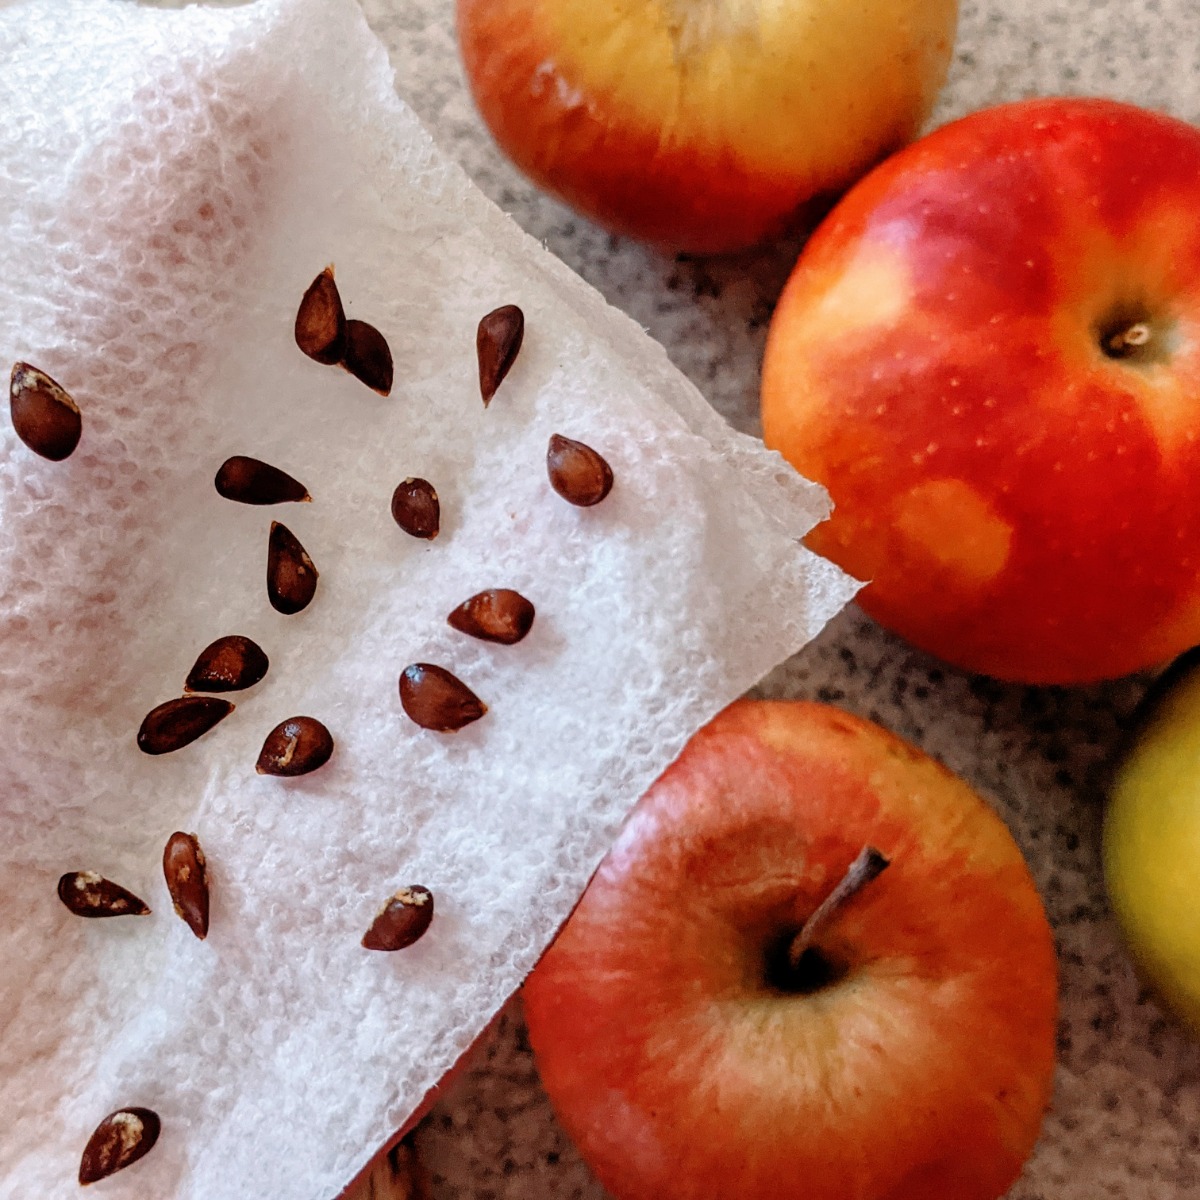 Red apples with lots of seeds on a napkin